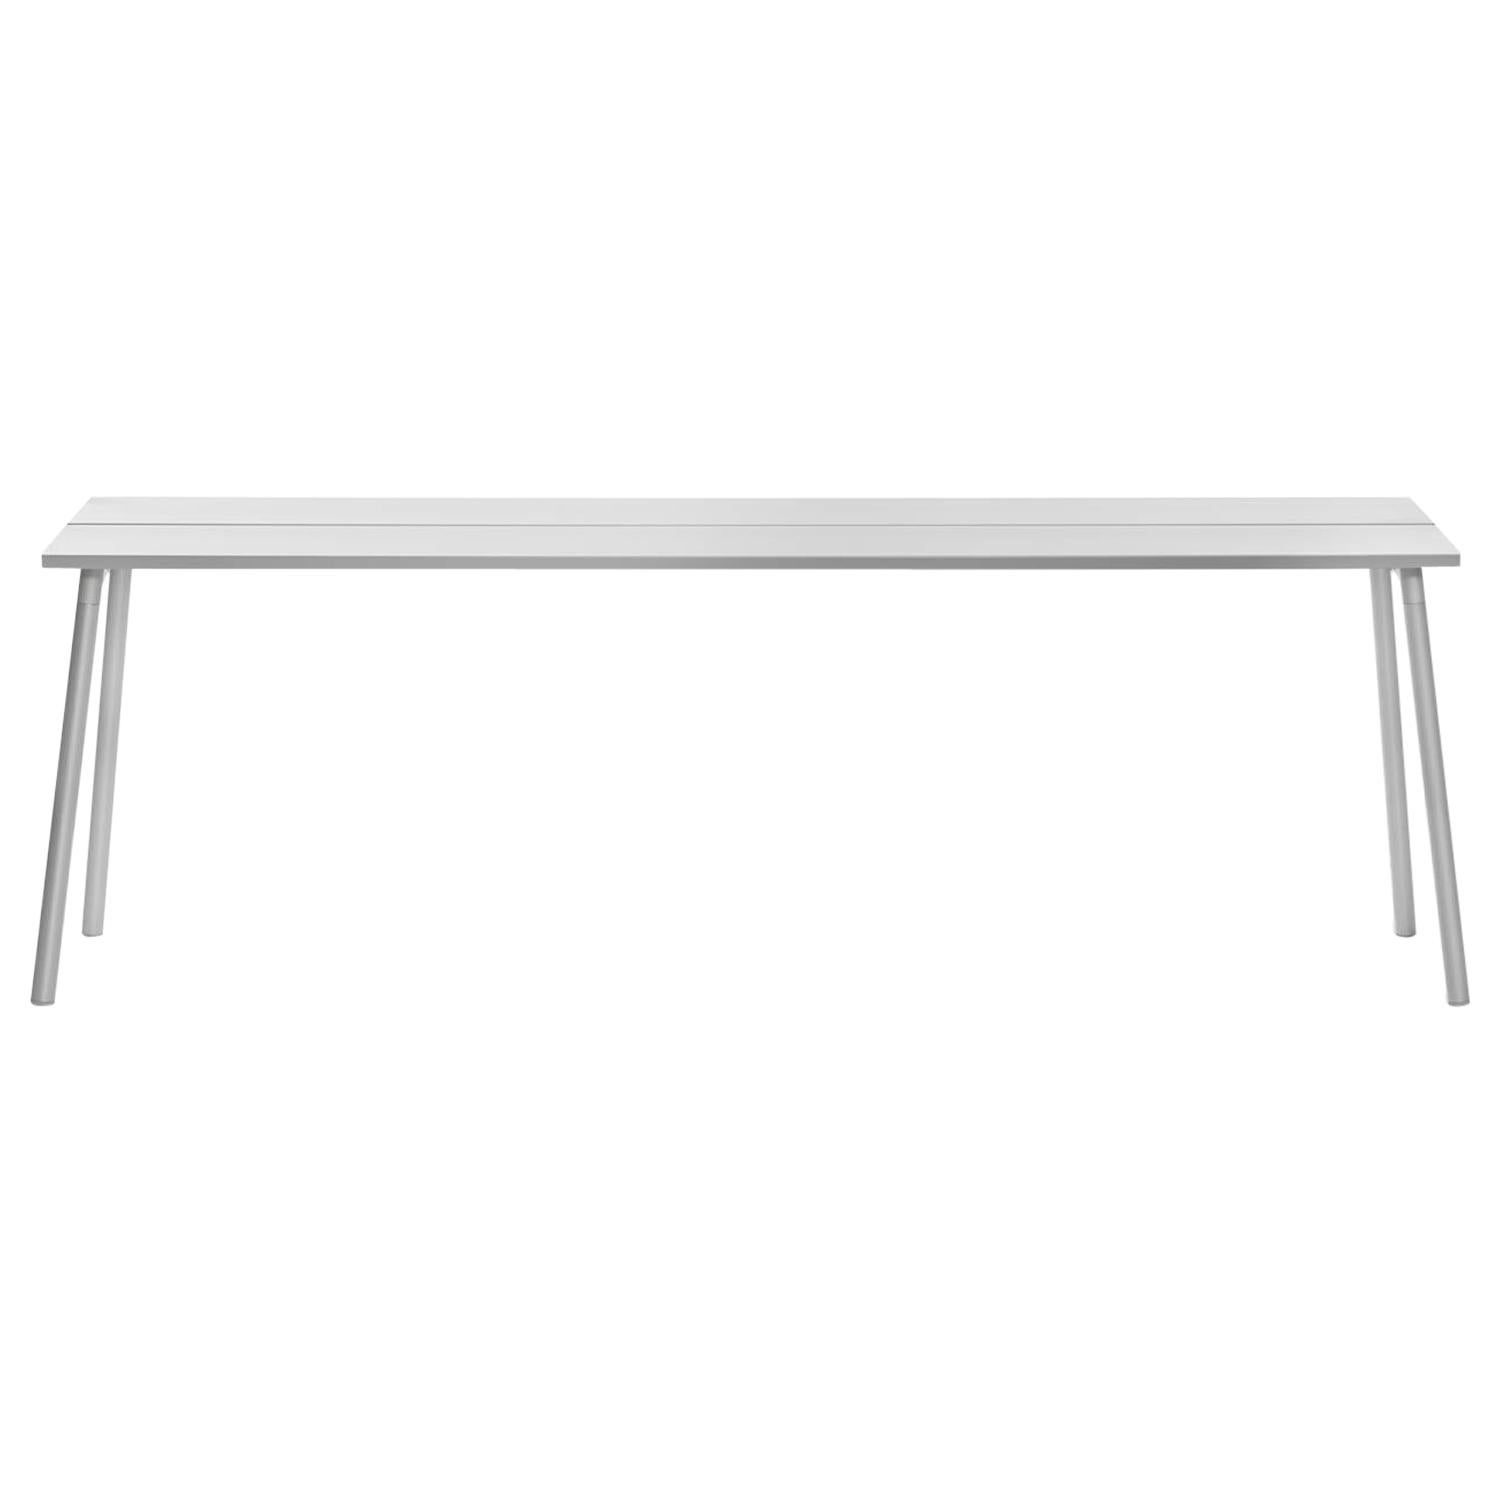 Emeco Run Large Side Table in Clear Anodized Aluminum by Sam Hecht + Kim Colin